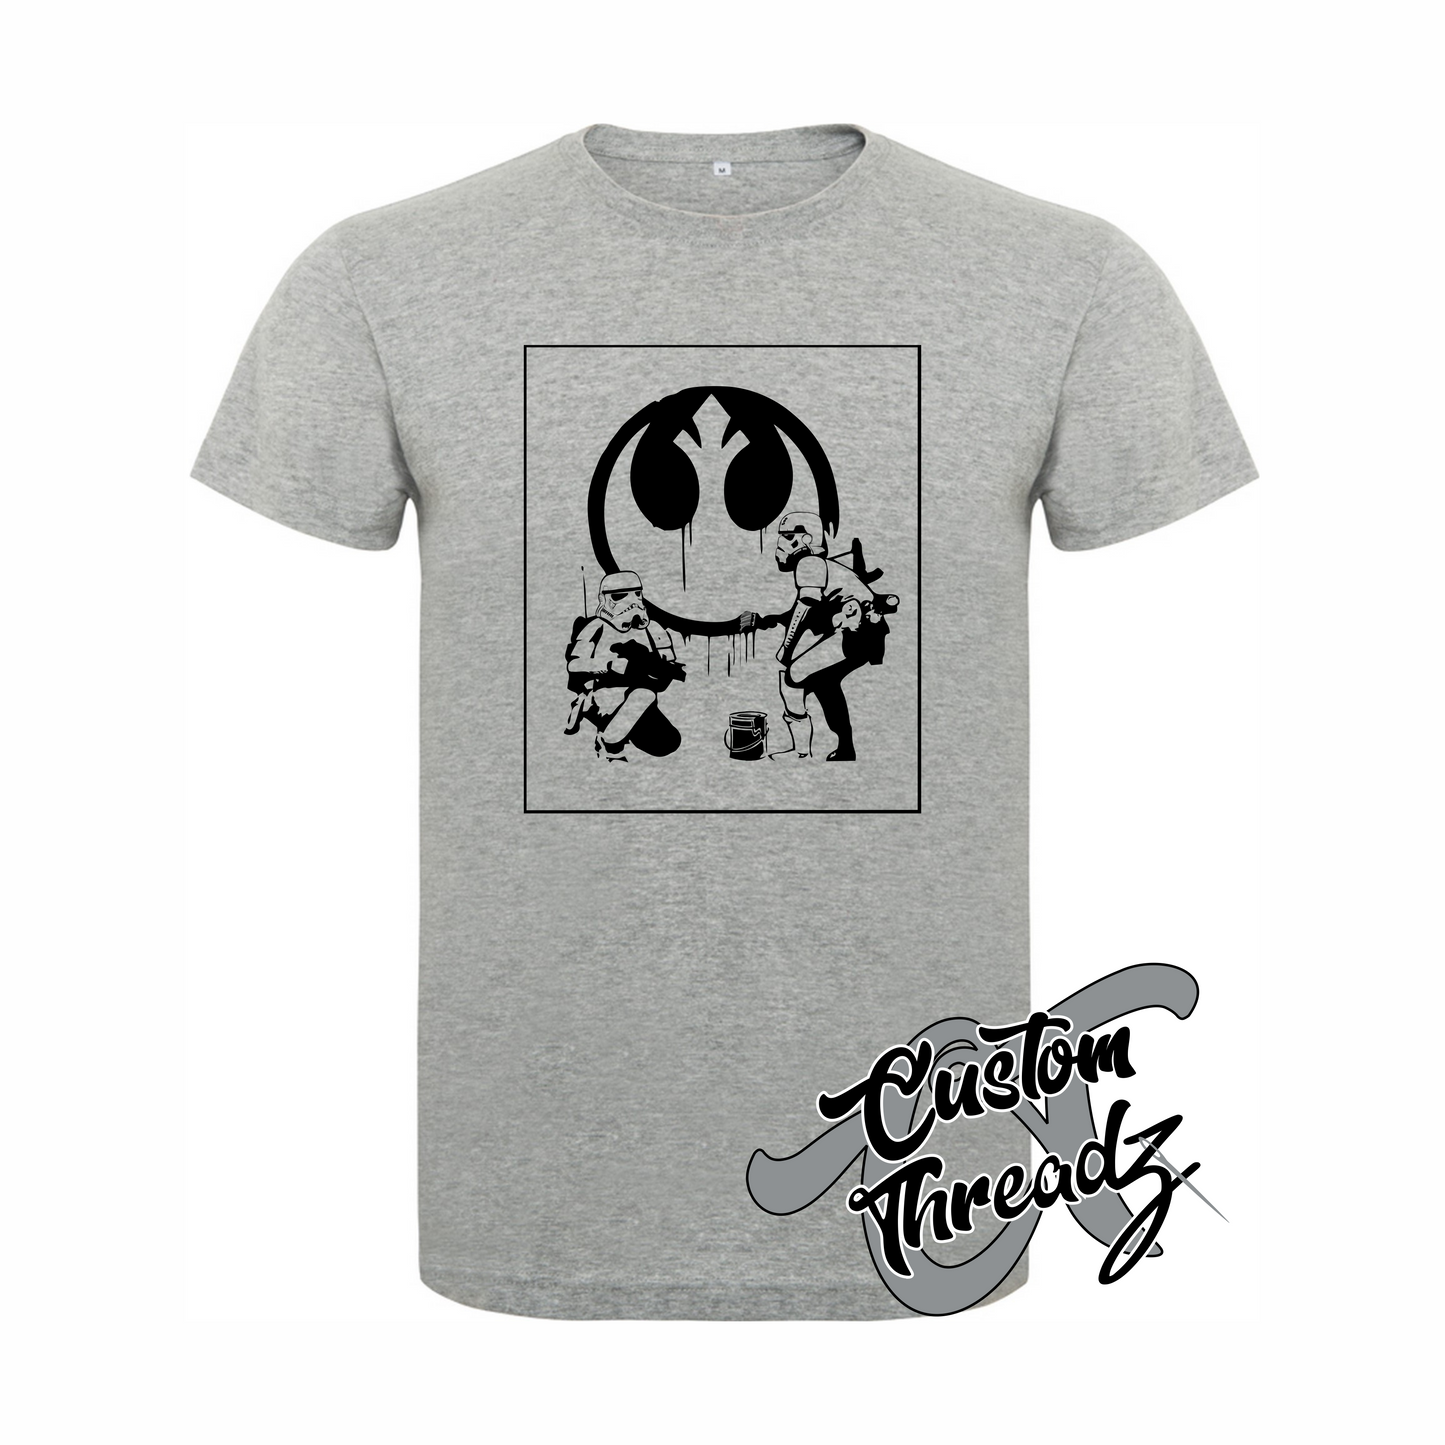 athletic heather grey tee with rebel alliance star wars stormtroopers DTG printed design